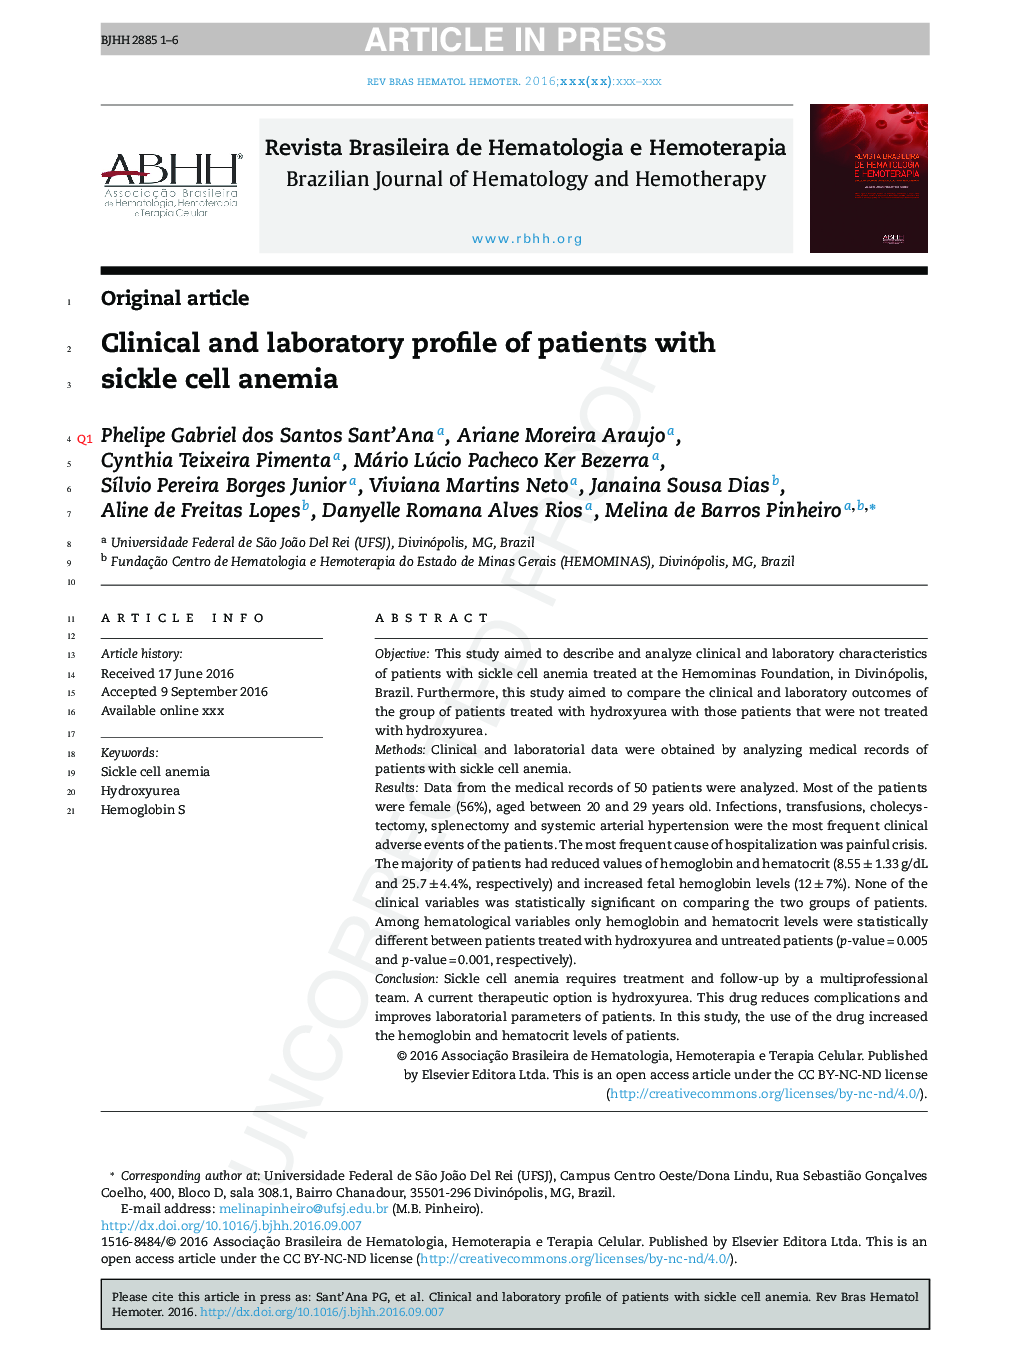 Clinical and laboratory profile of patients with sickle cell anemia